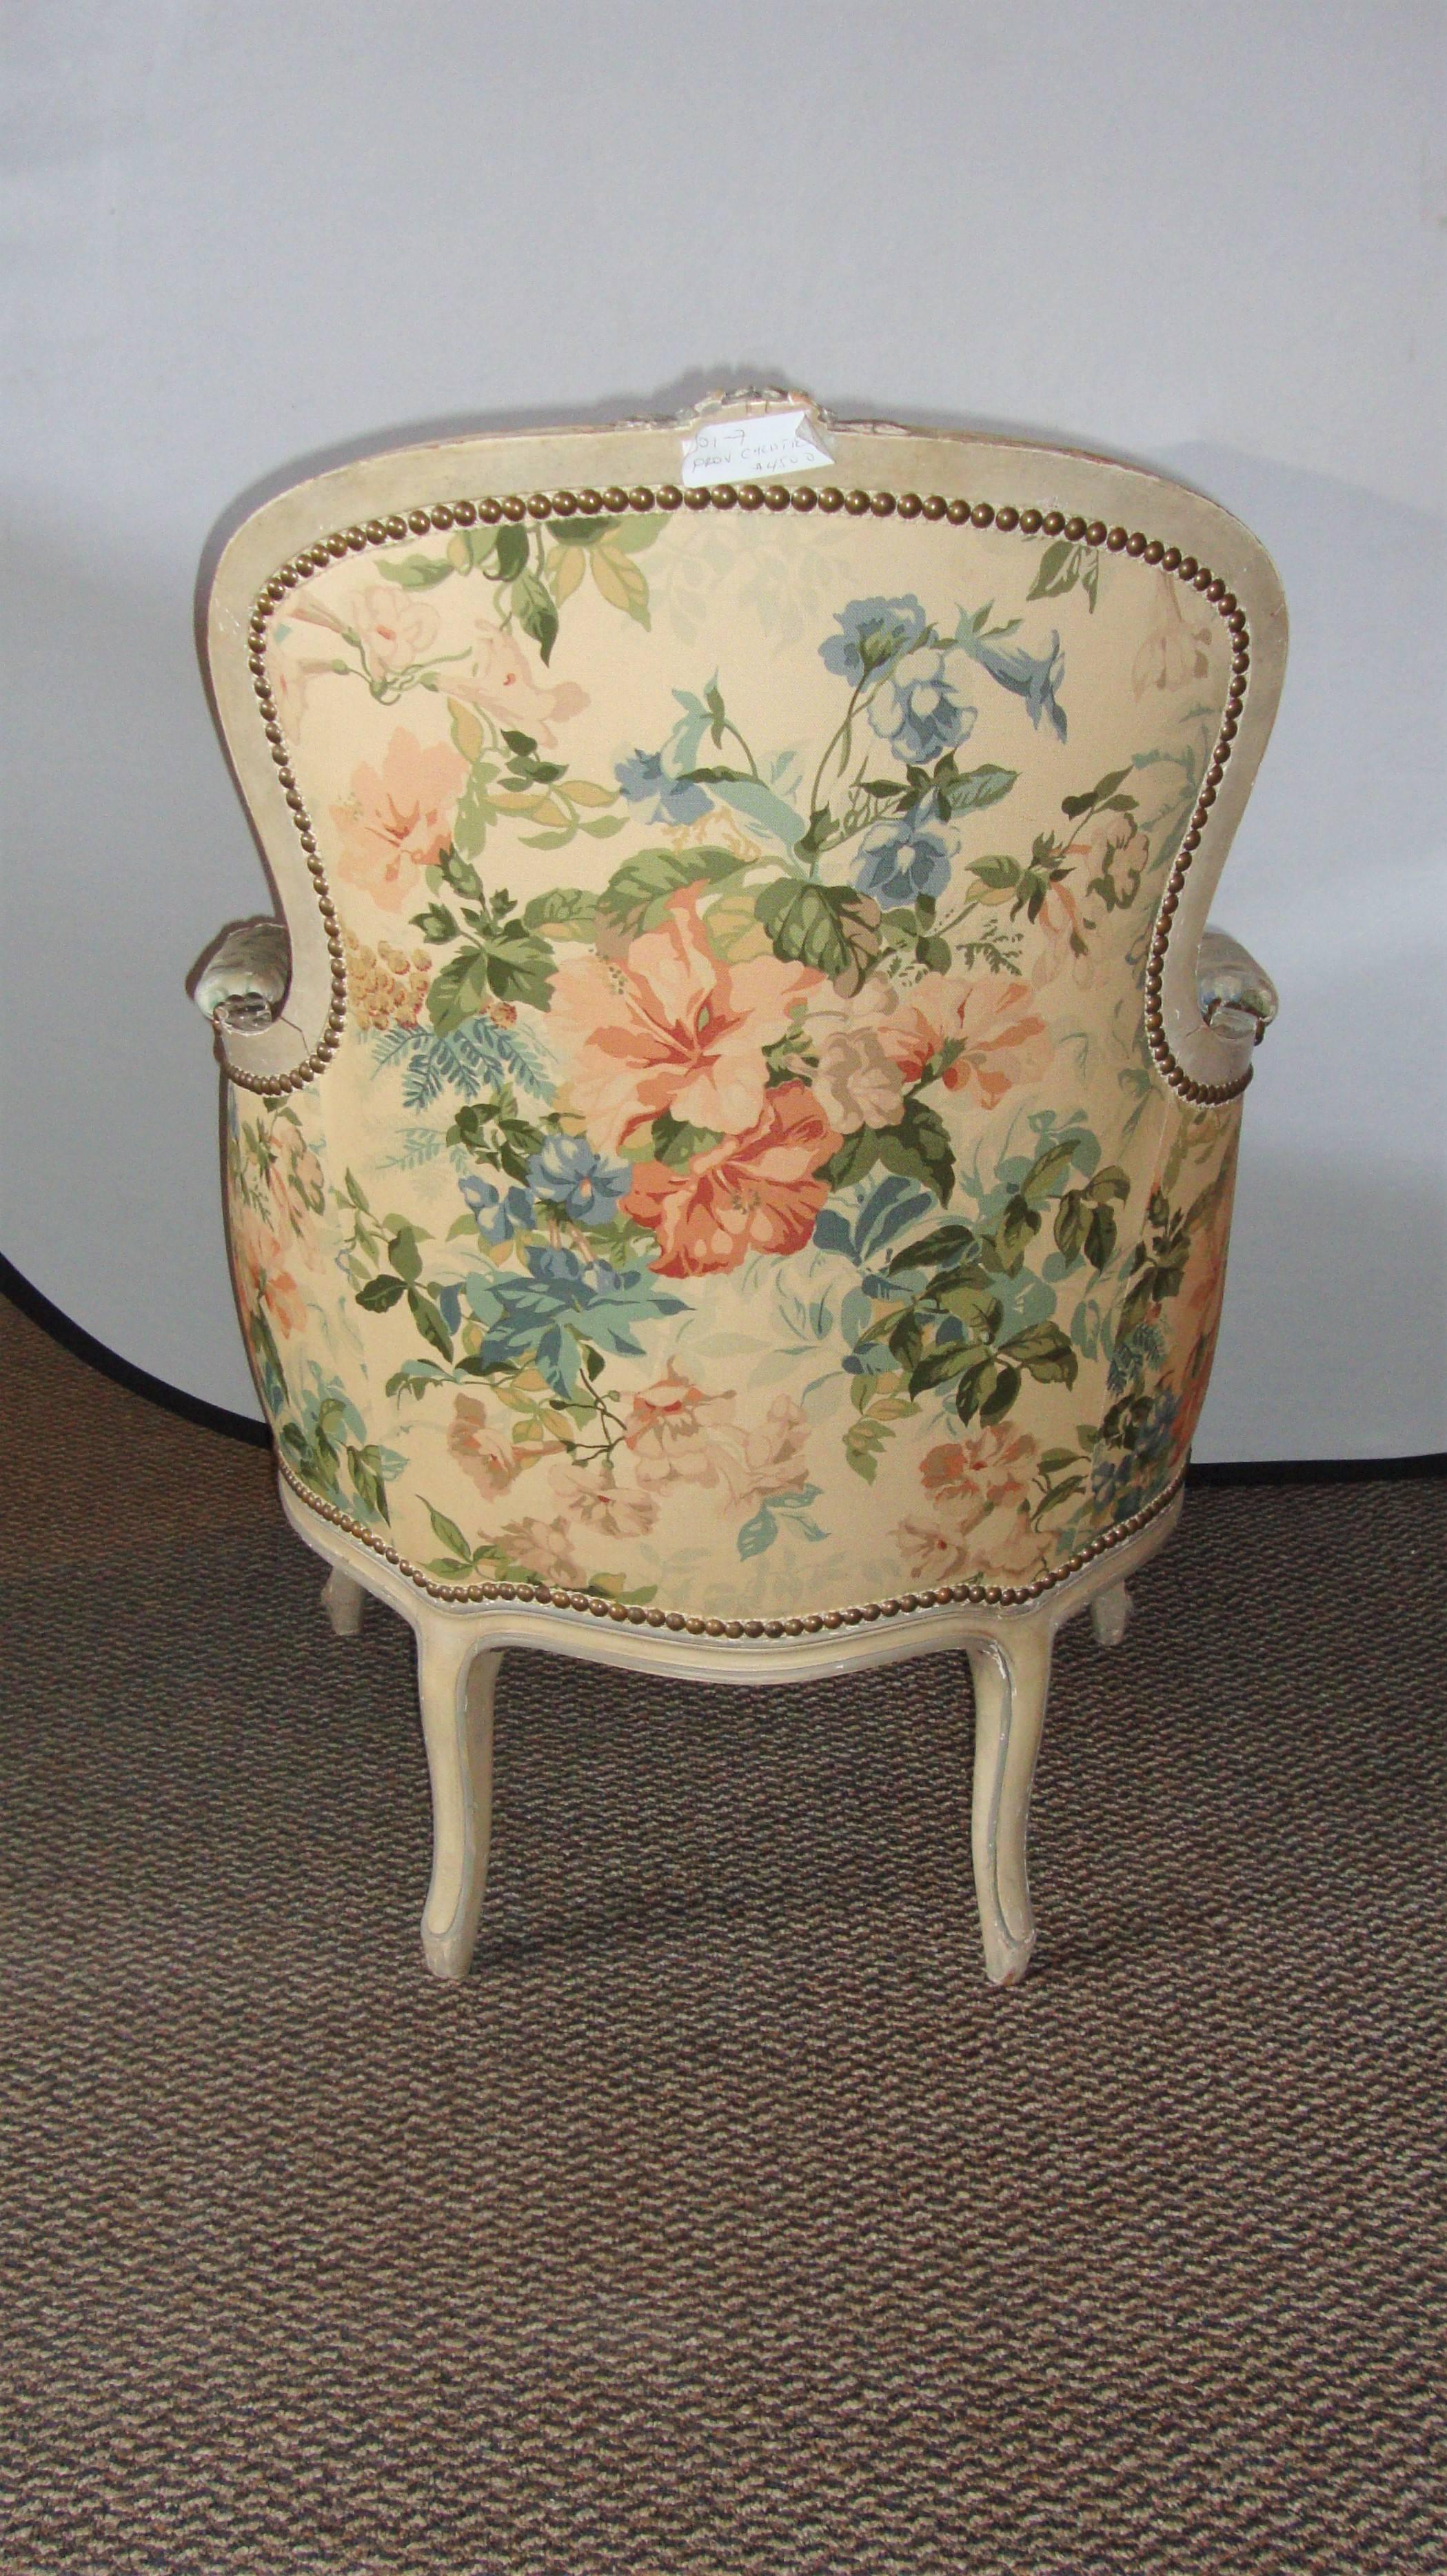 20th Century Pair of Louis XV Style Distressed Paint Decorated Chairs by Jansen